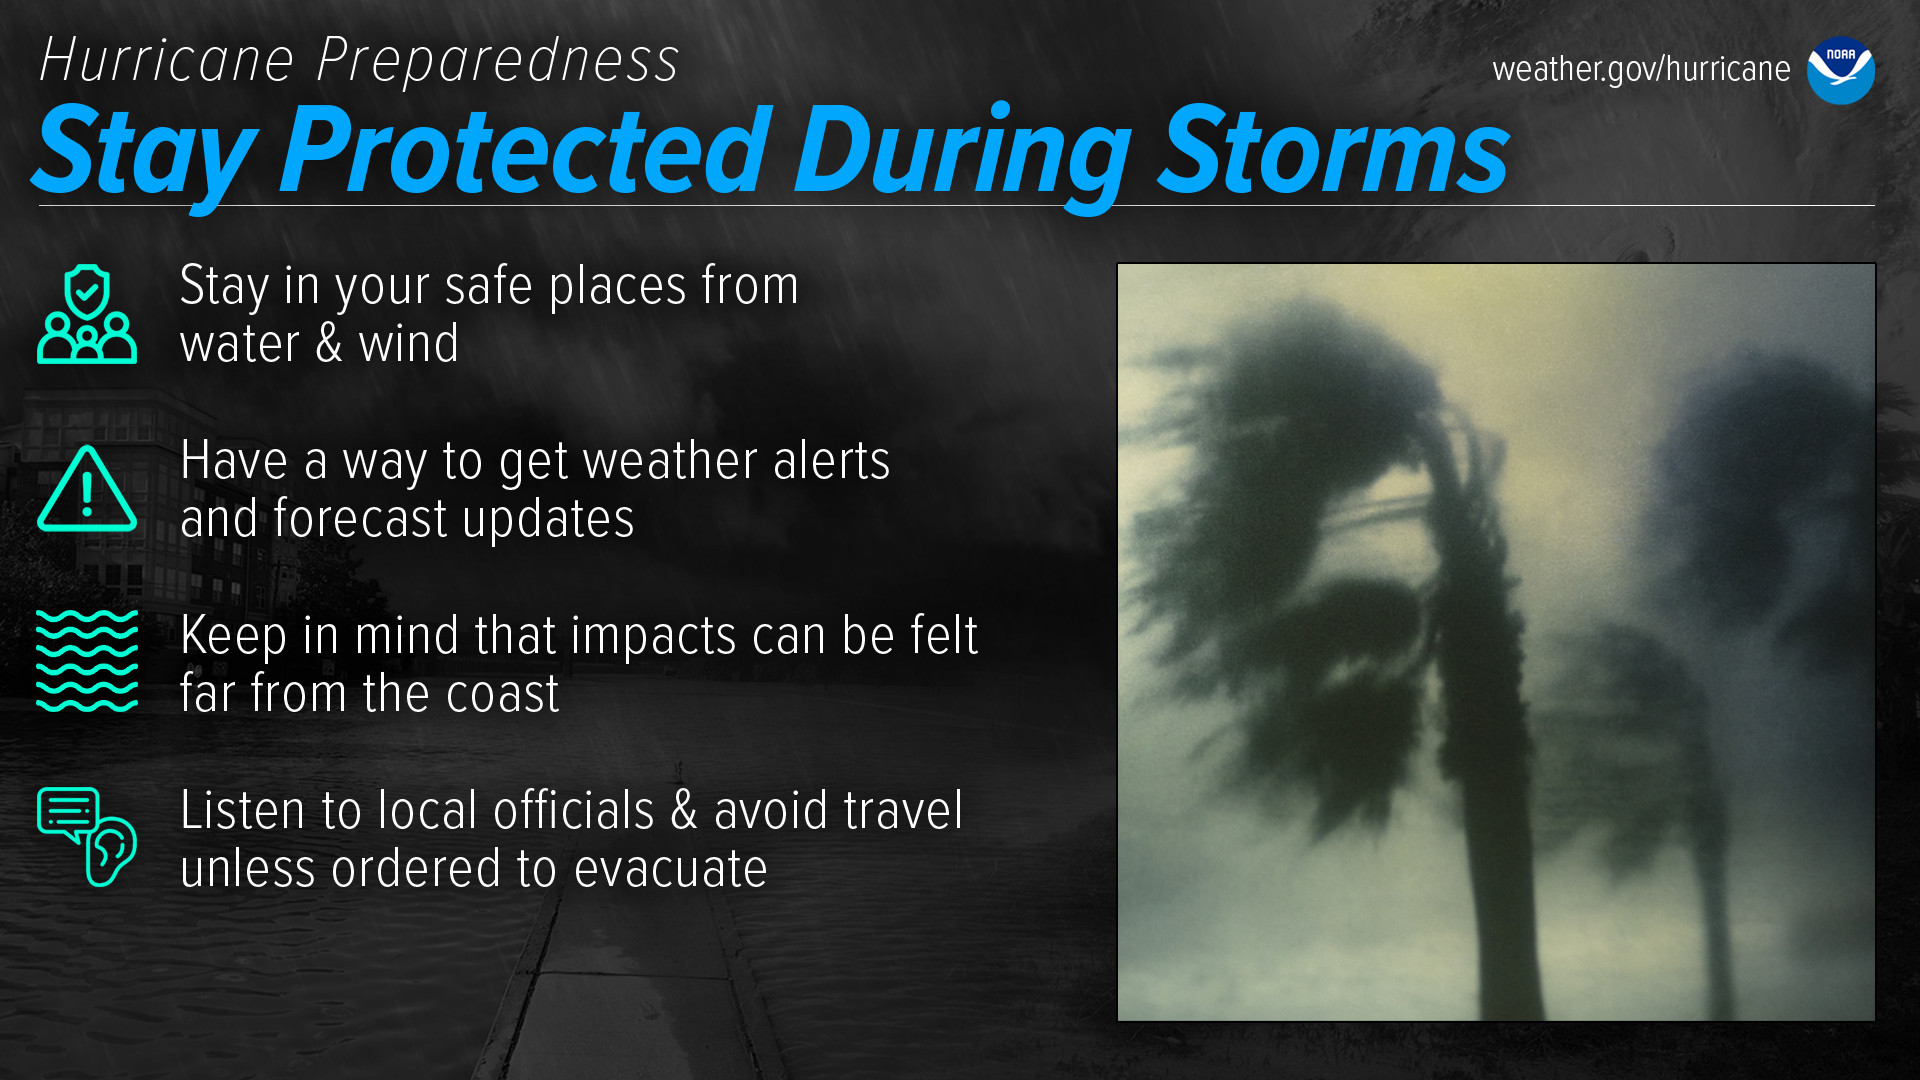 Hurricane Preparedness - Stay Protected During Storms. Stay in your safe places from water and wind. Have a way to get weather alerts and forecast updates. Keep in mind that impacts can be felt far from the coast. Listen to local officials and avoid travel unless ordered to evacuate.  Image credit: NOAA's National Weather Service